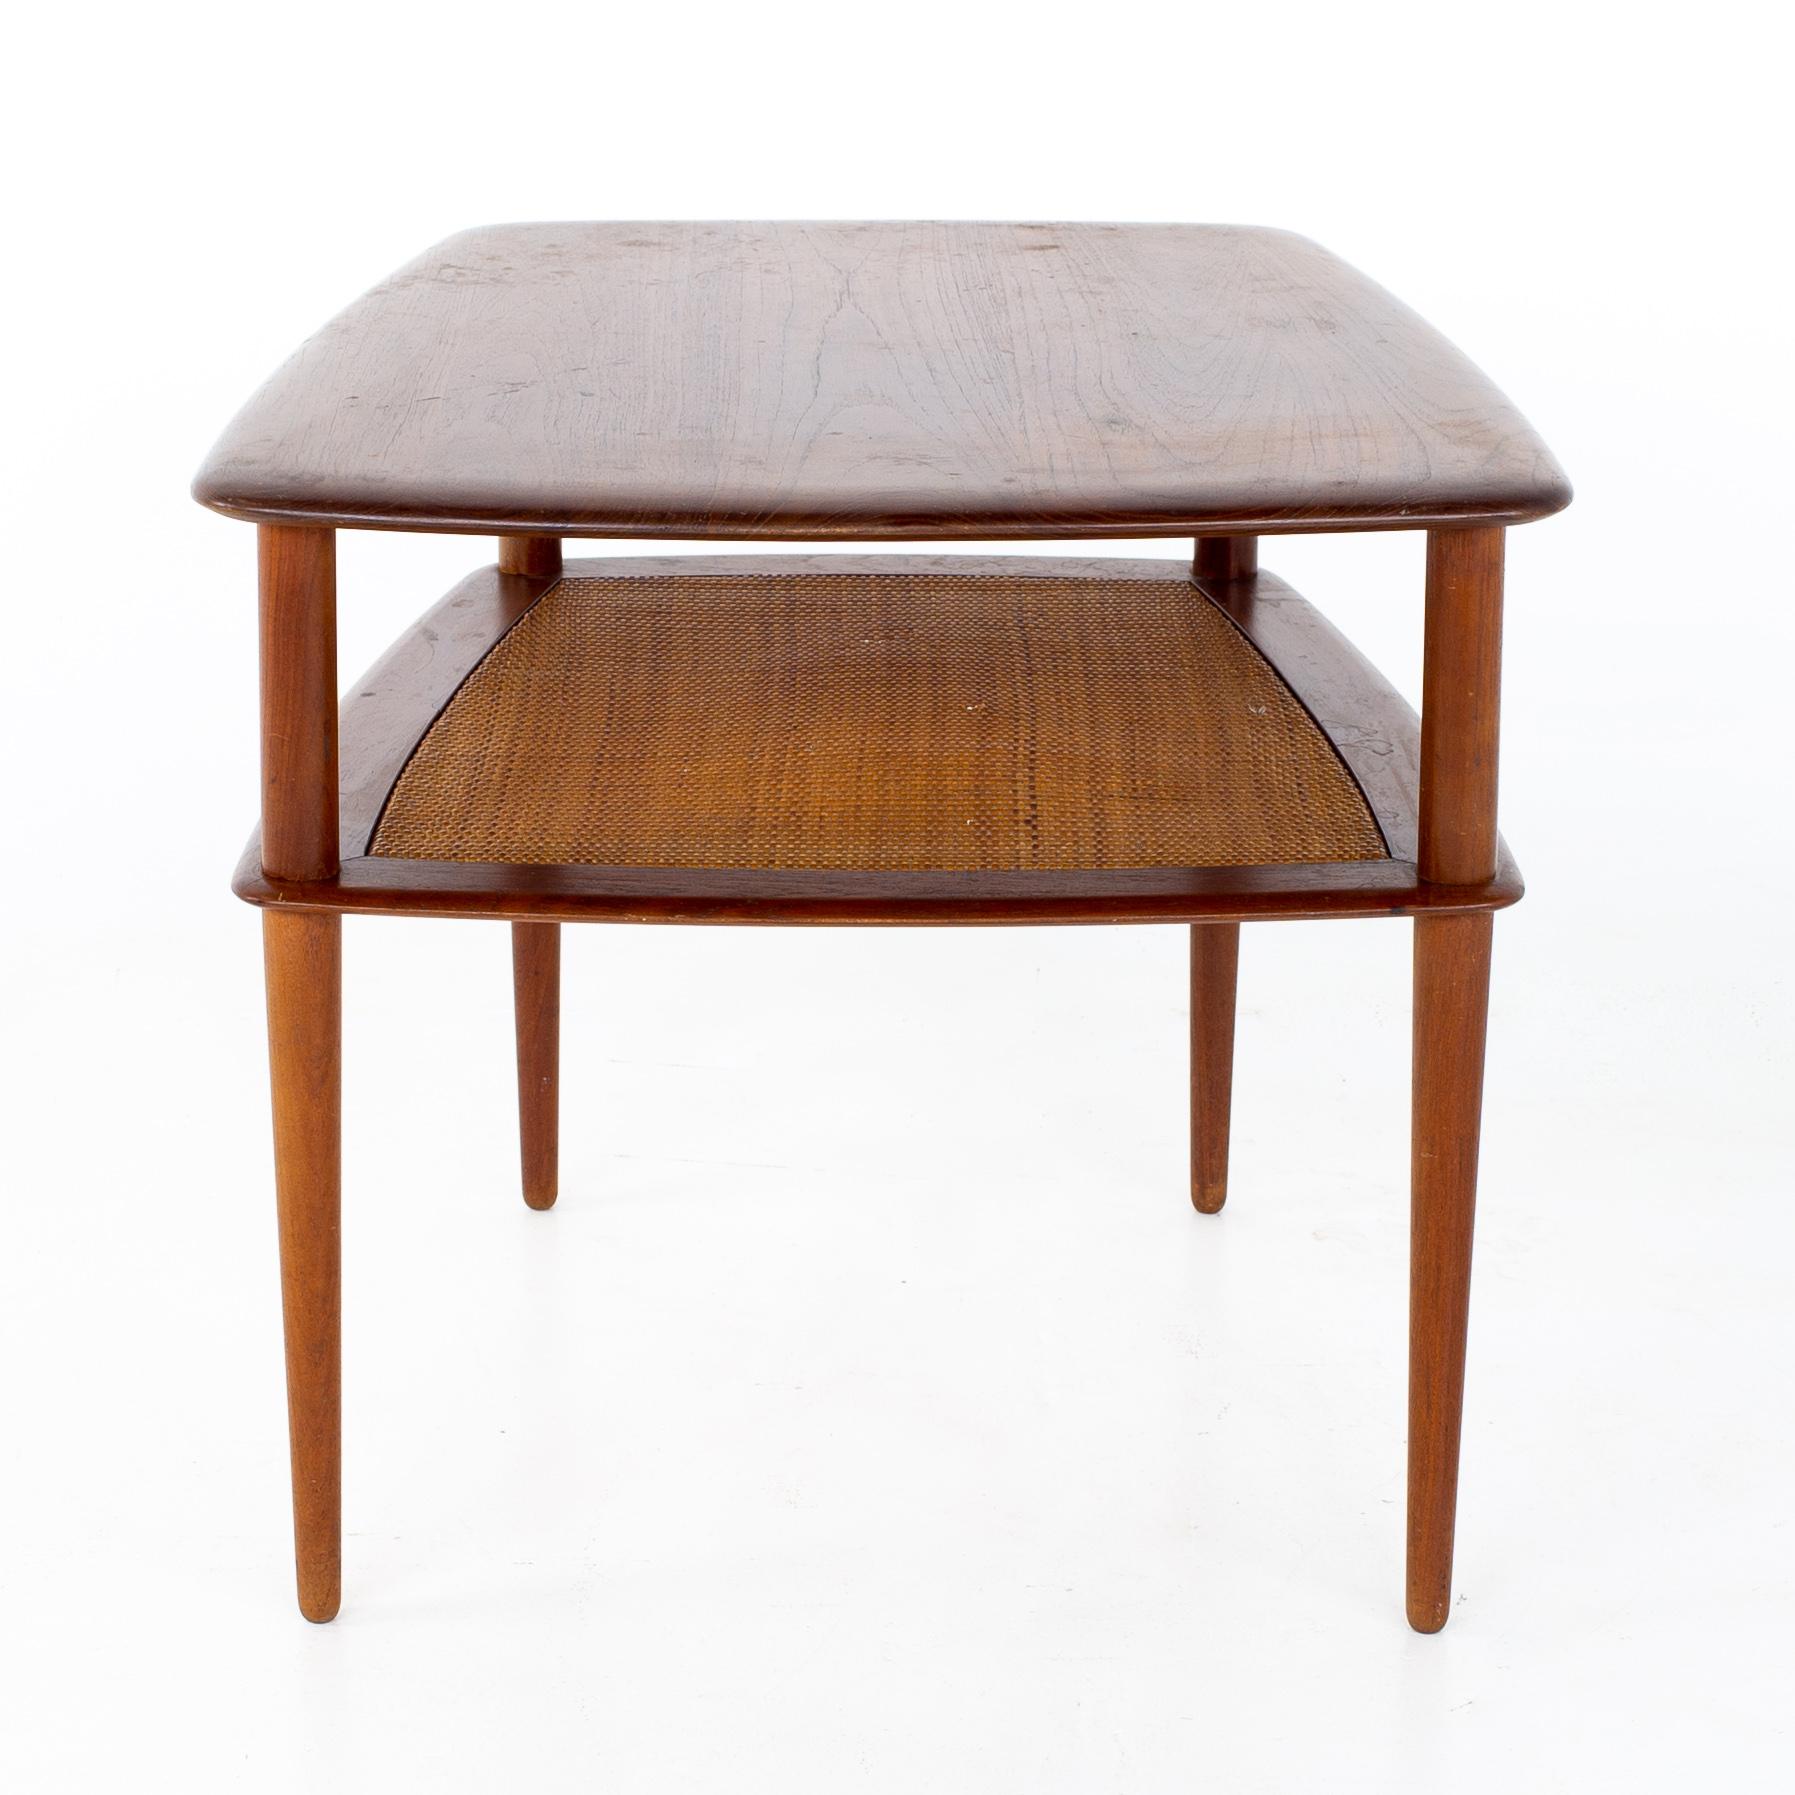 Peter Hvidt for France and Son mid century teak and cane side end table

This end table measures: 25 wide x 27.5 deep x 22.75 inches high. 

All pieces of furniture can be had in what we call restored vintage condition. That means the piece is